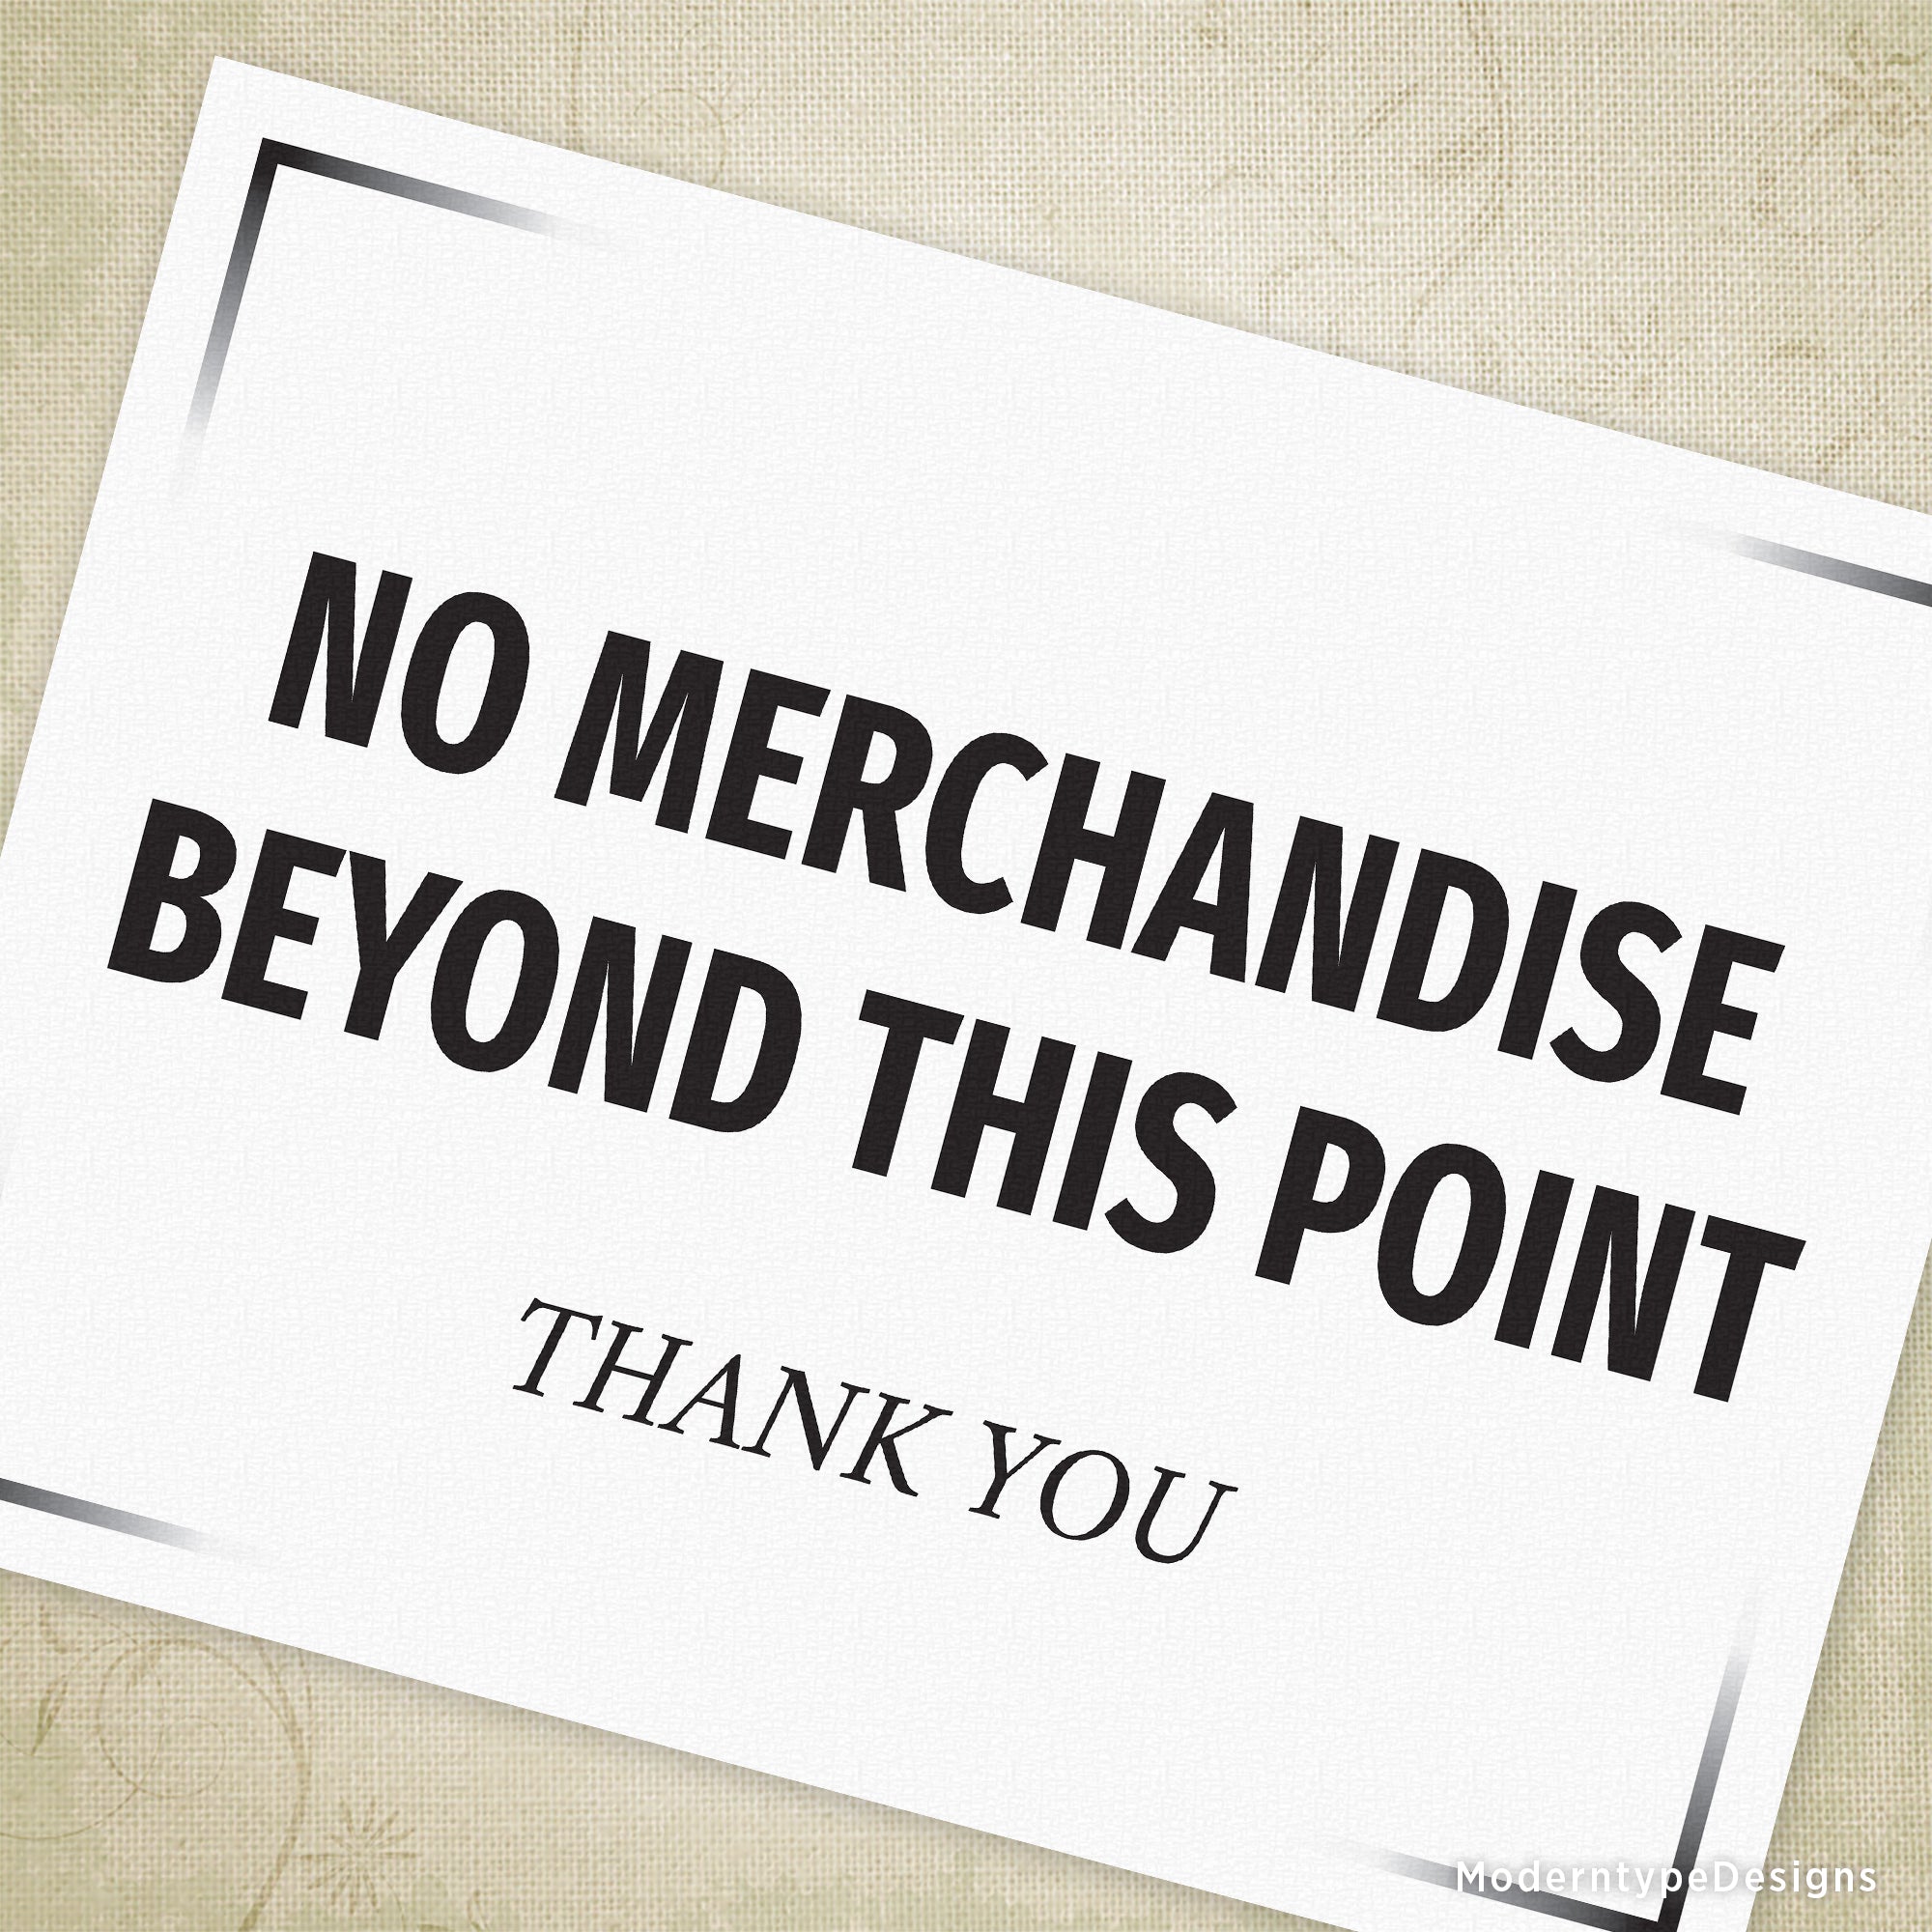 No Merchandise Beyond This Point Printable Sign